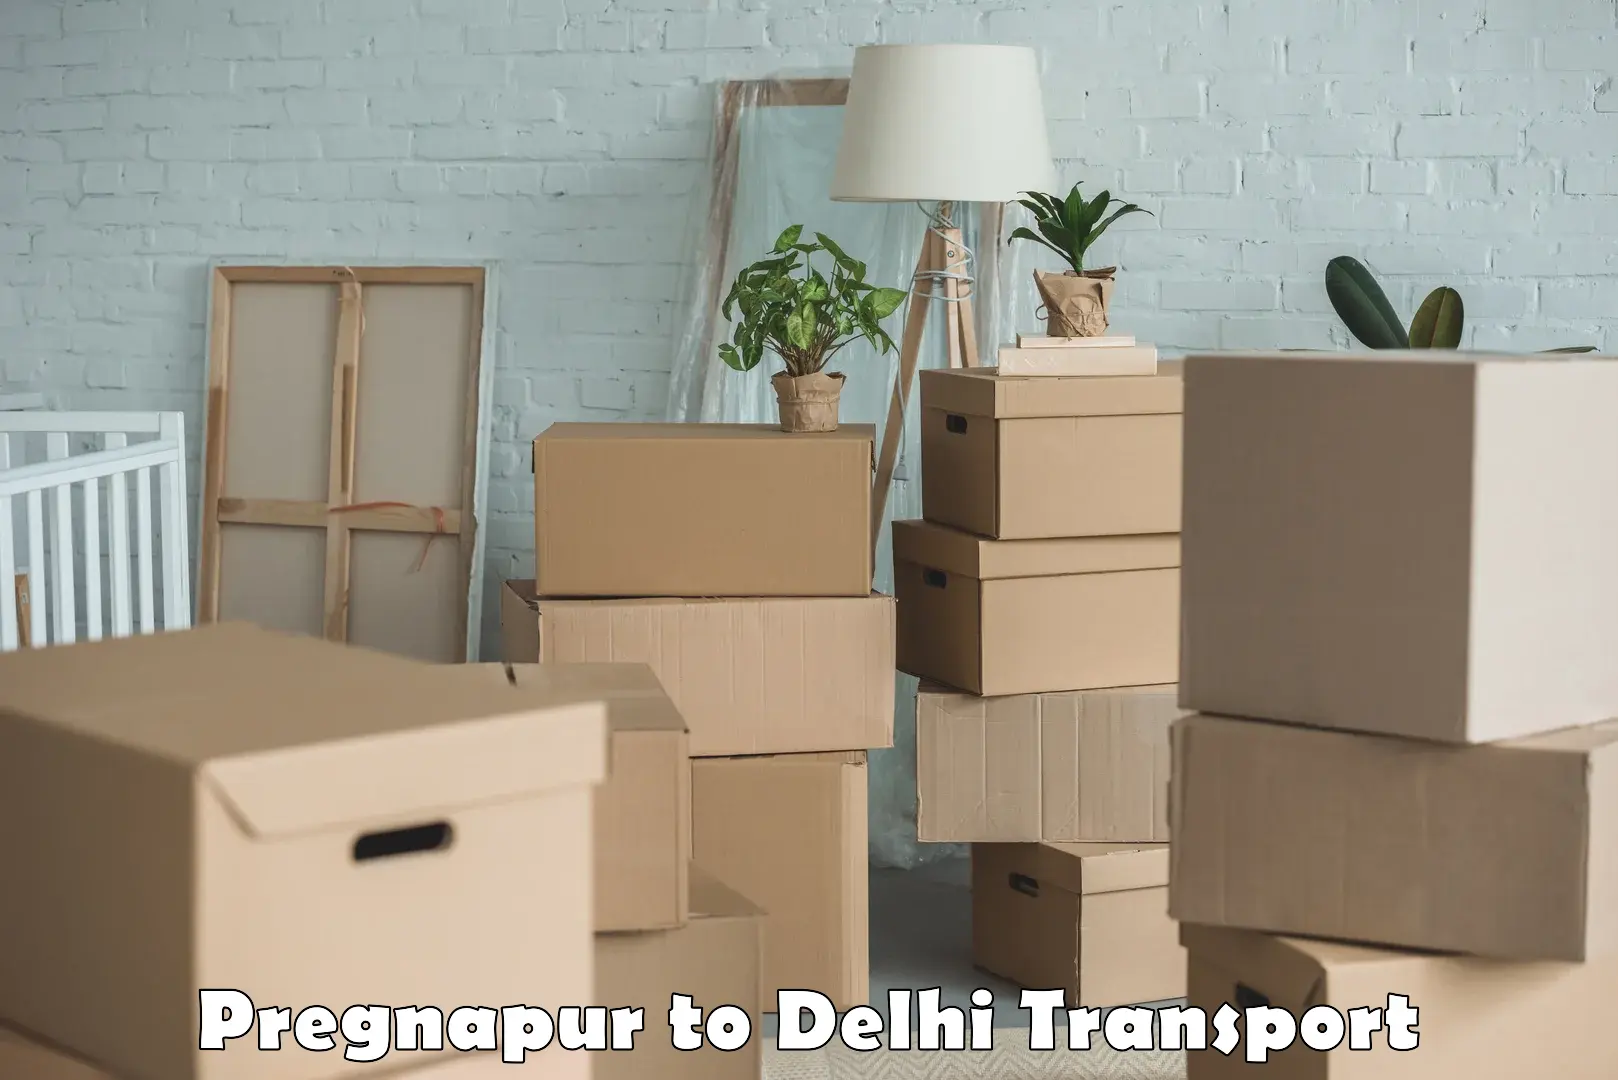 Interstate transport services Pregnapur to NCR